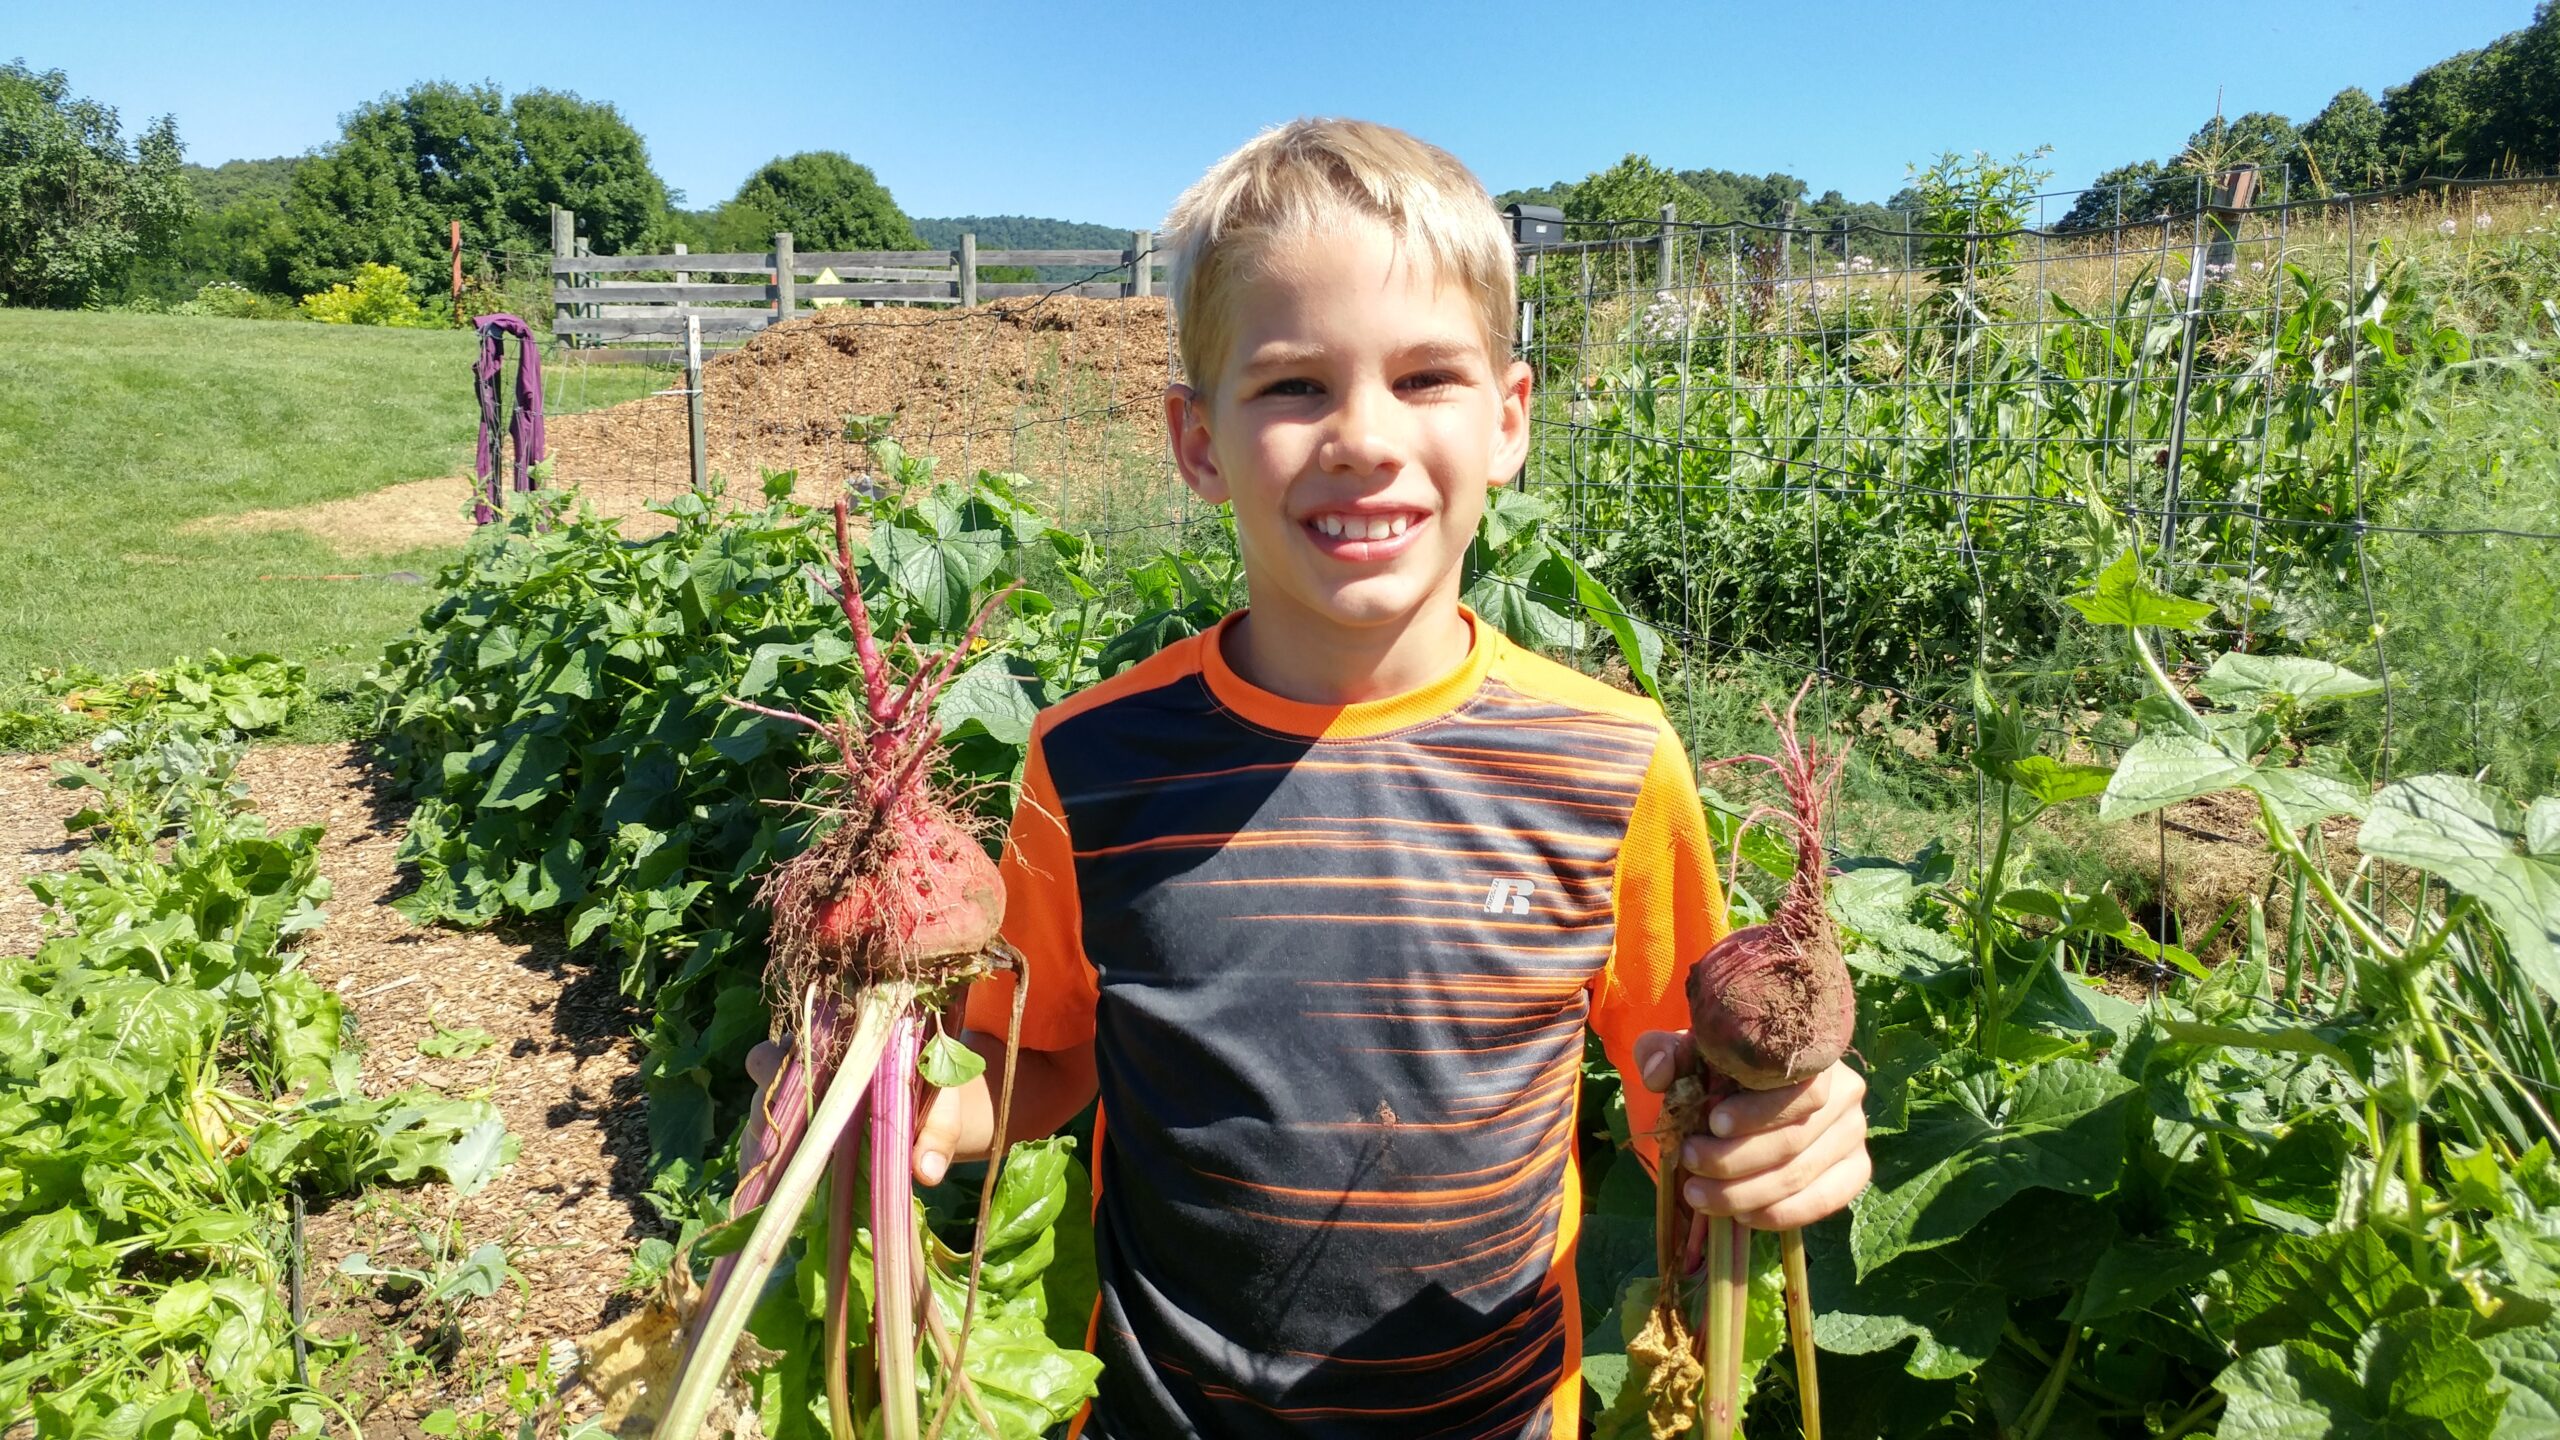 Little boy holding two freshly picked beets in the garden.